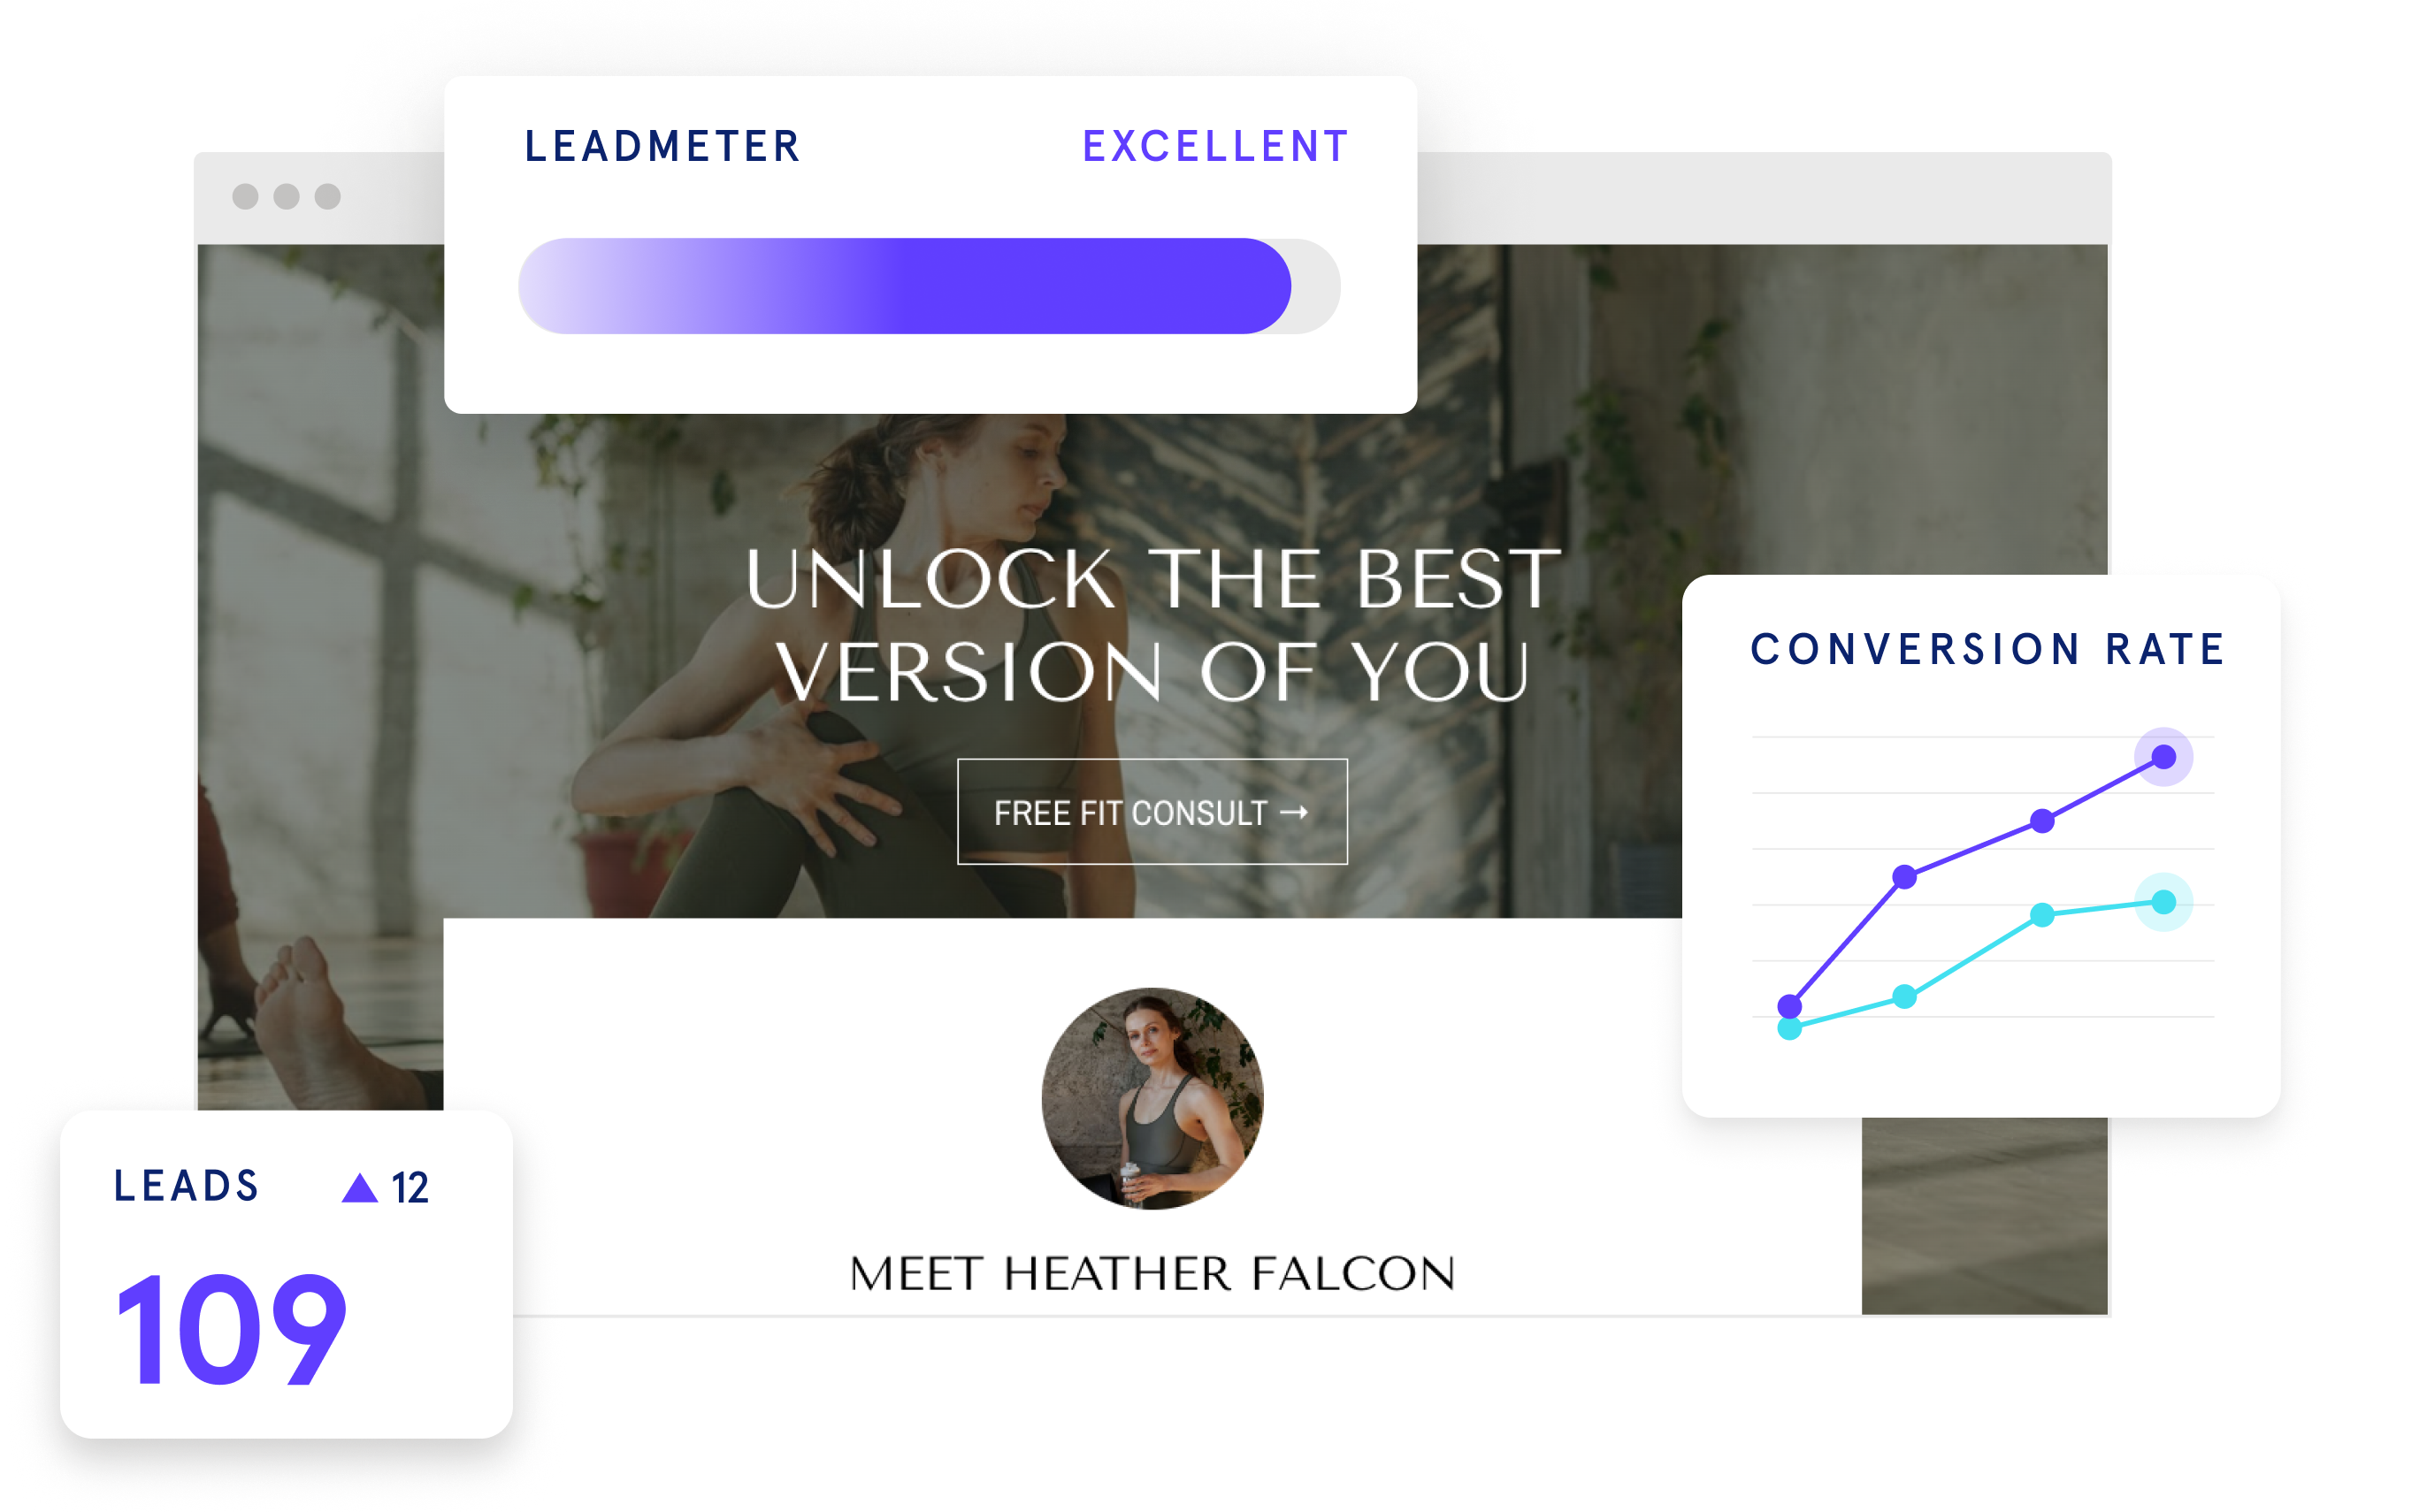 leadpages landing page with interface elements containing a lead growth count and an upward-trending conversion rate line graph